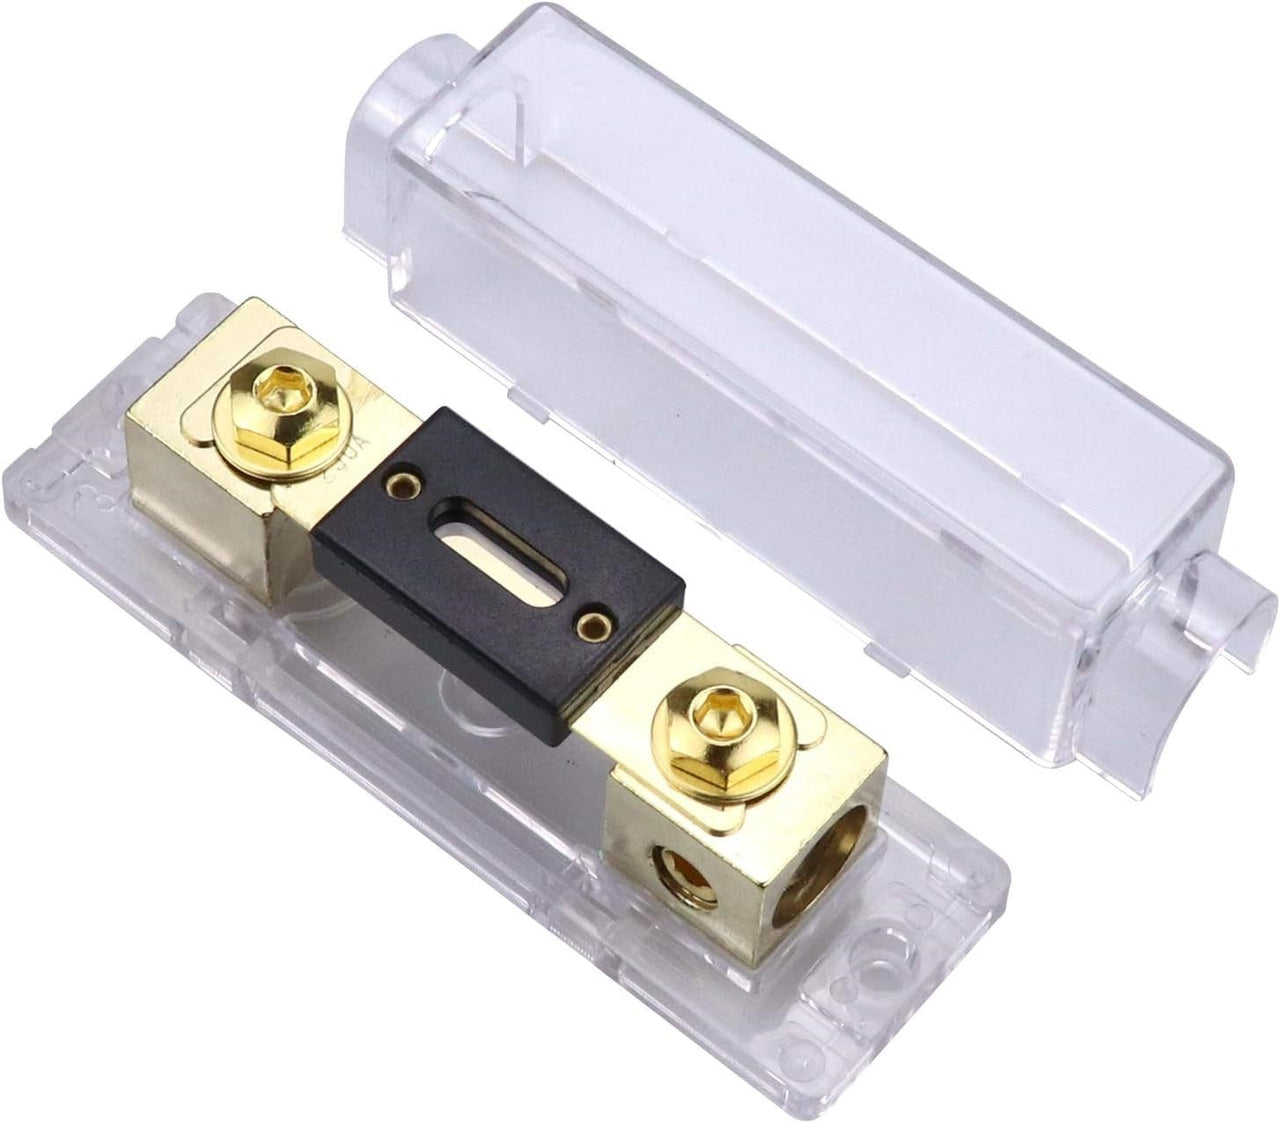 2 Absolute ANH-3 0/2/4 Gauge AWG in-Line ANL Fuse Holder & 2 Gold Plated 120 Amp Fuse